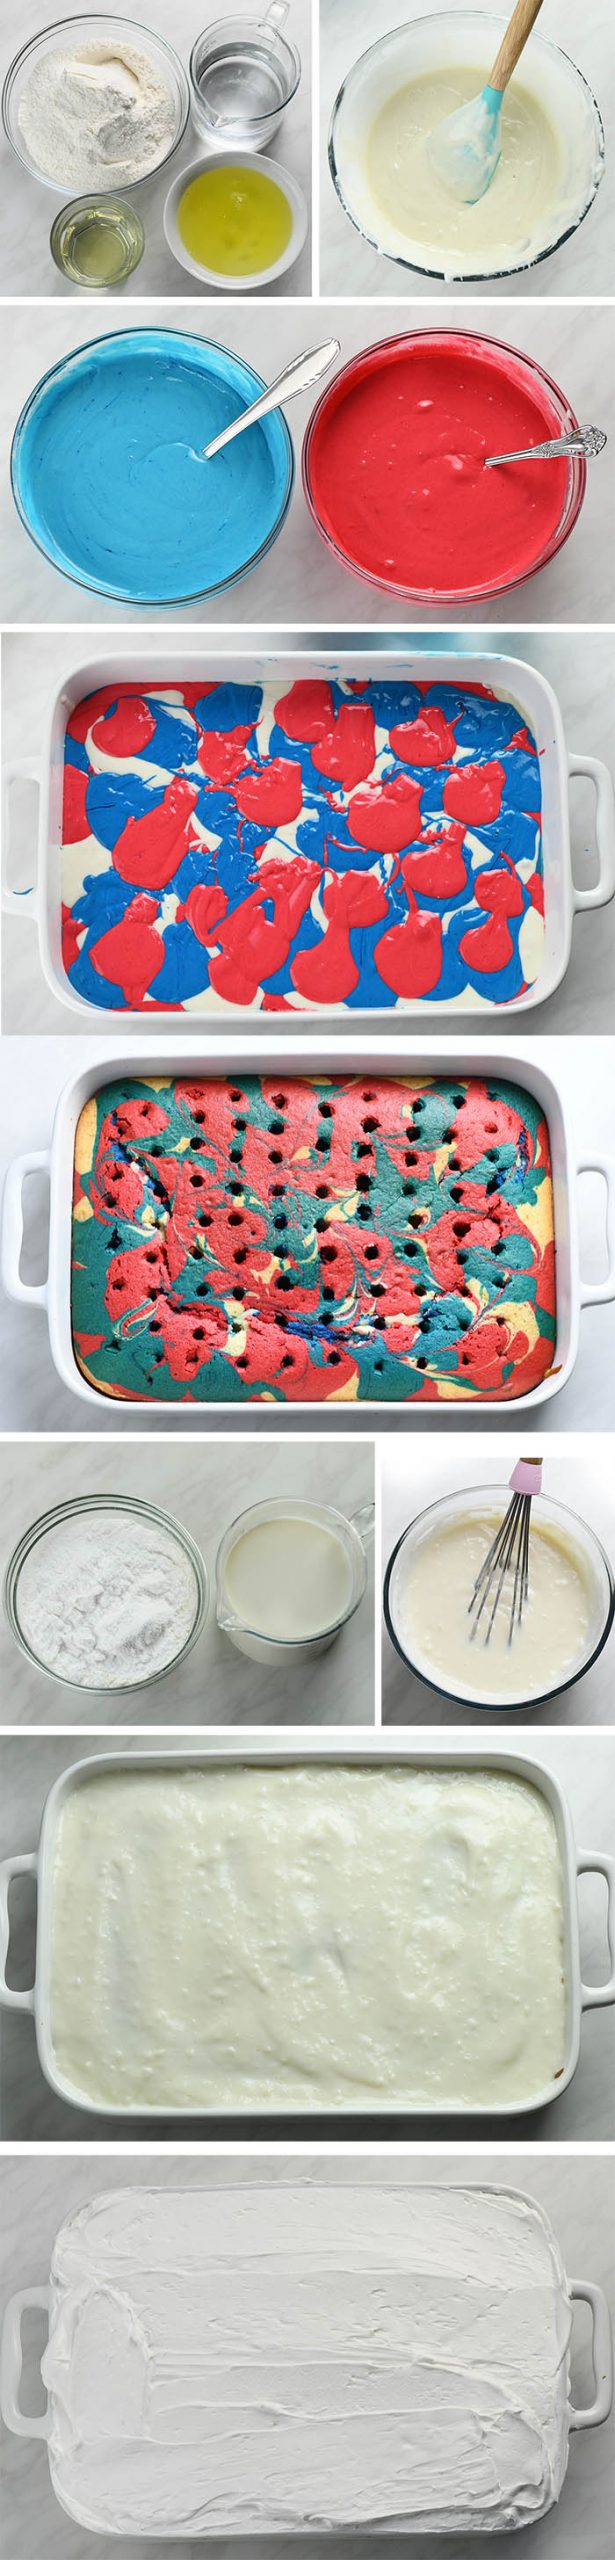 Step-by-step instructions for Patriotic Poke Cake.